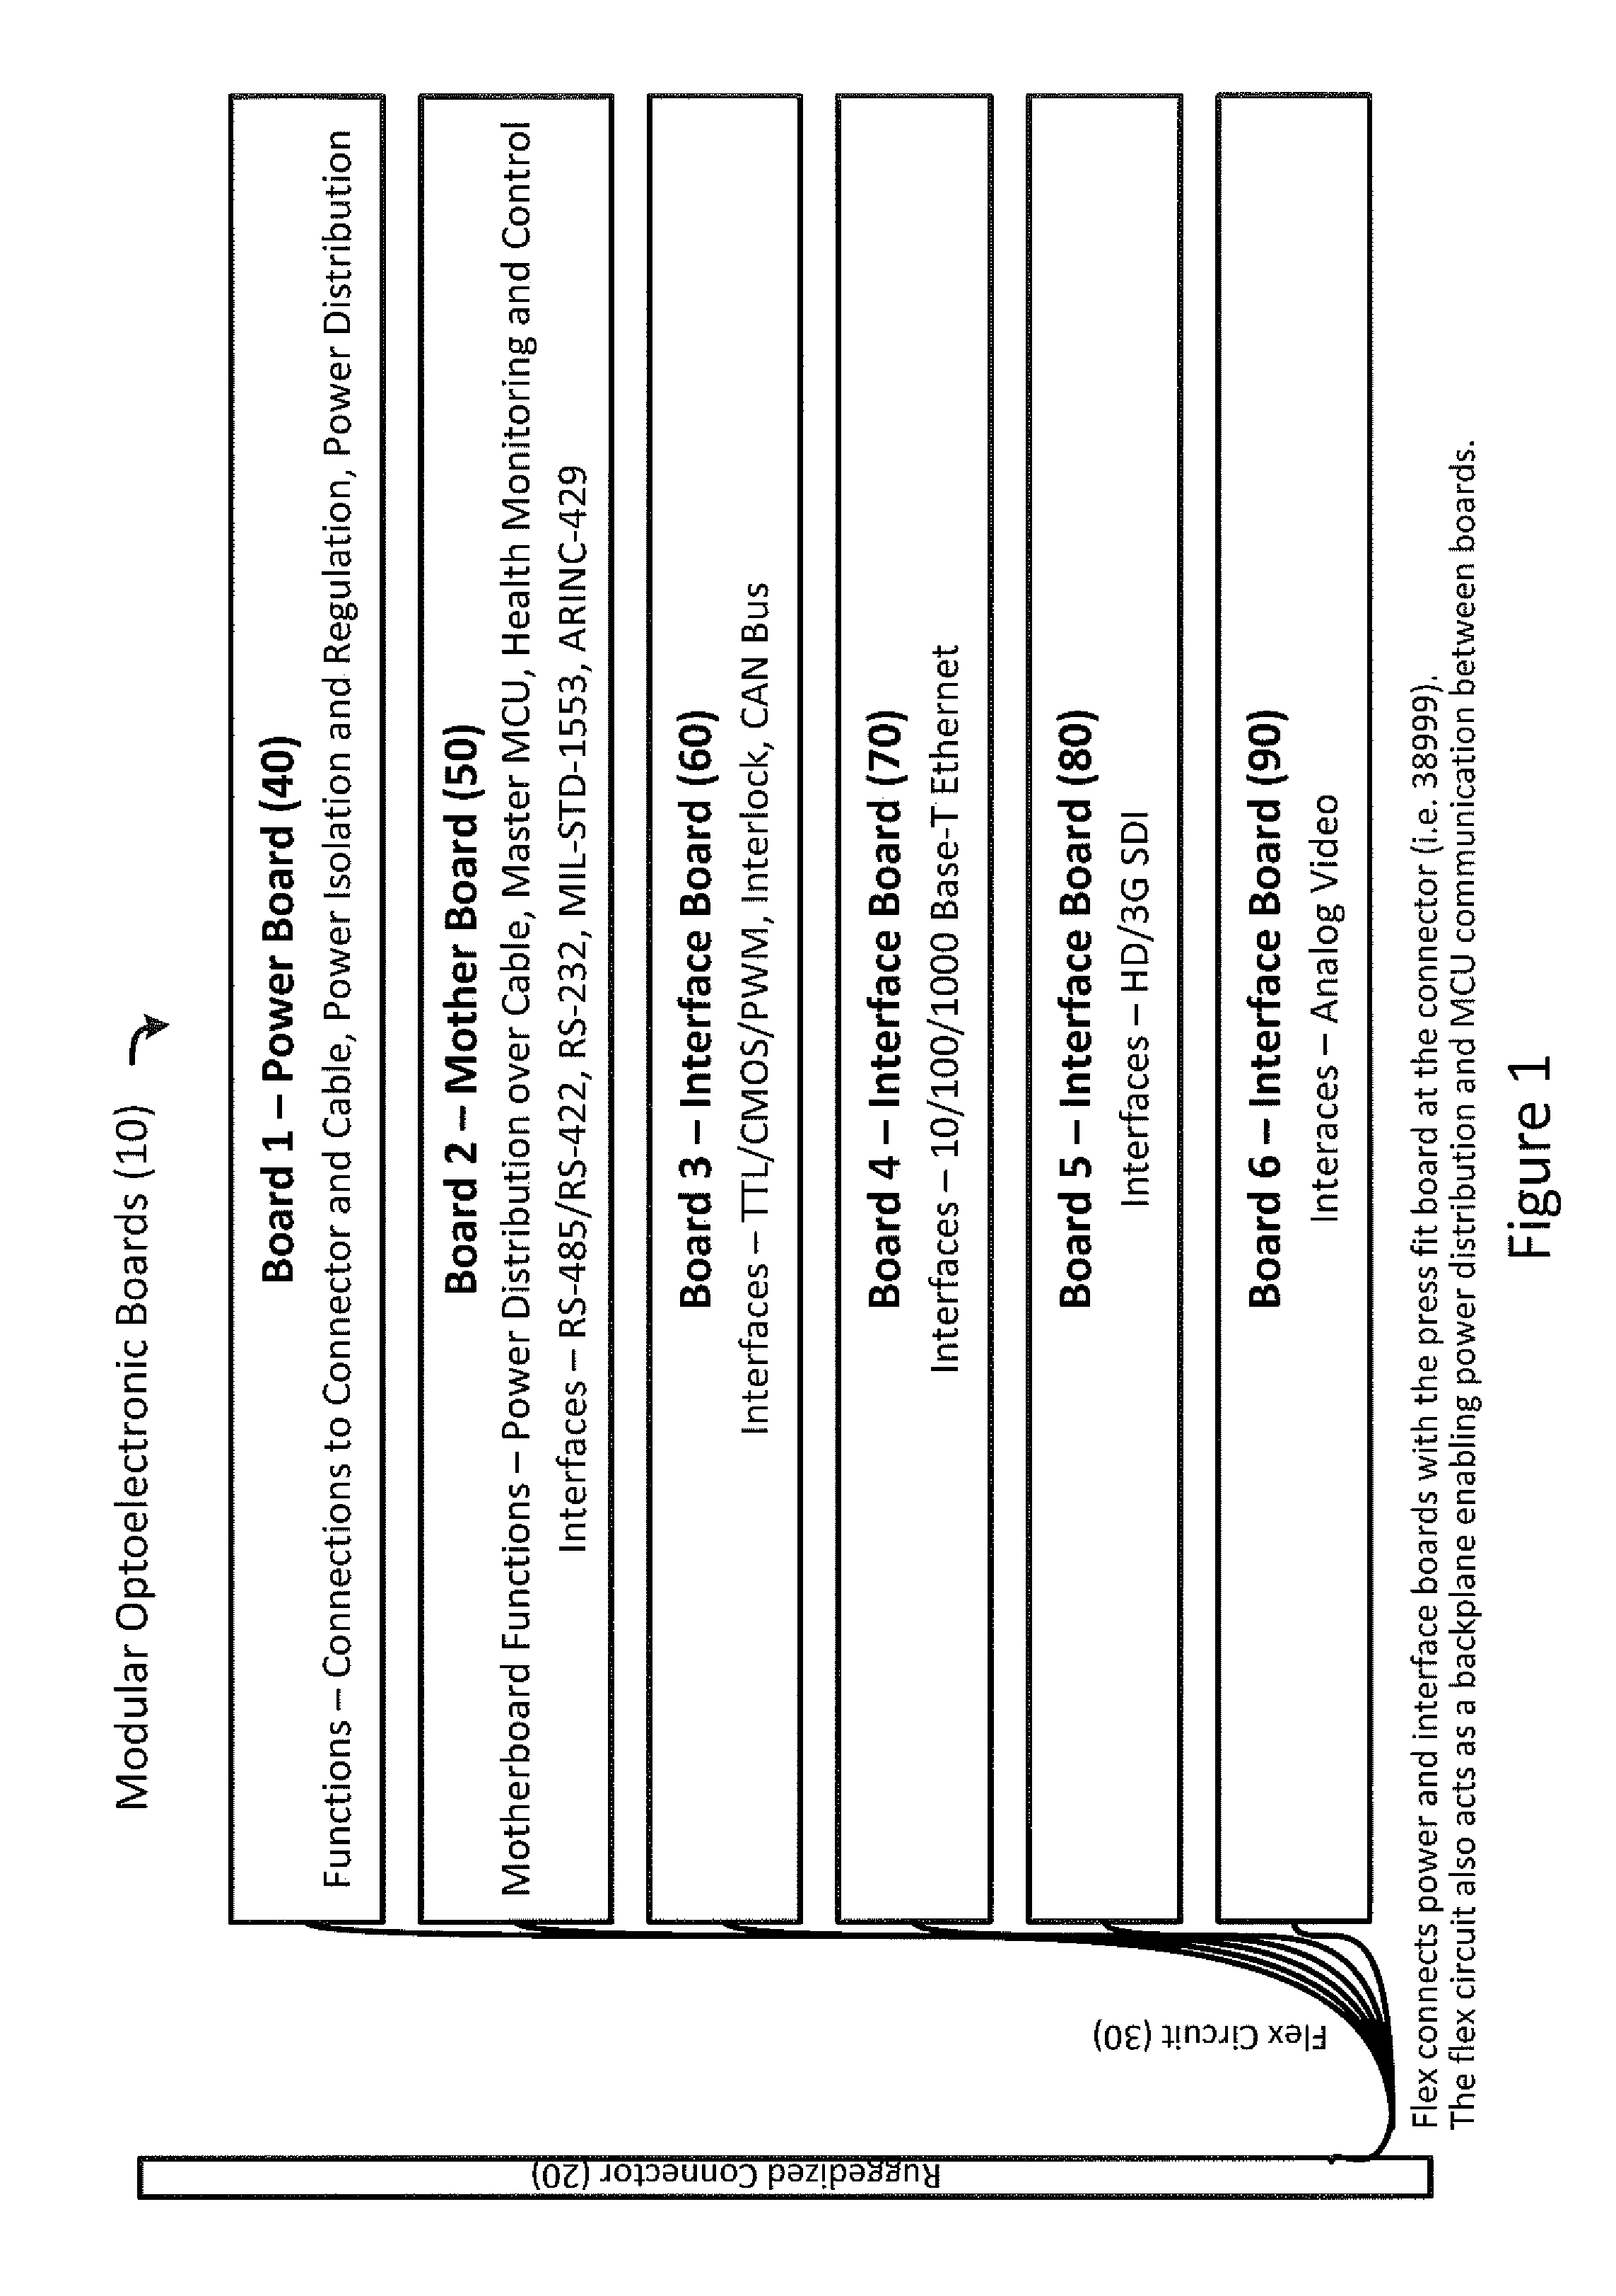 Method and apparatus for modular design, manufacturing and implementation of multi-function active optical cables